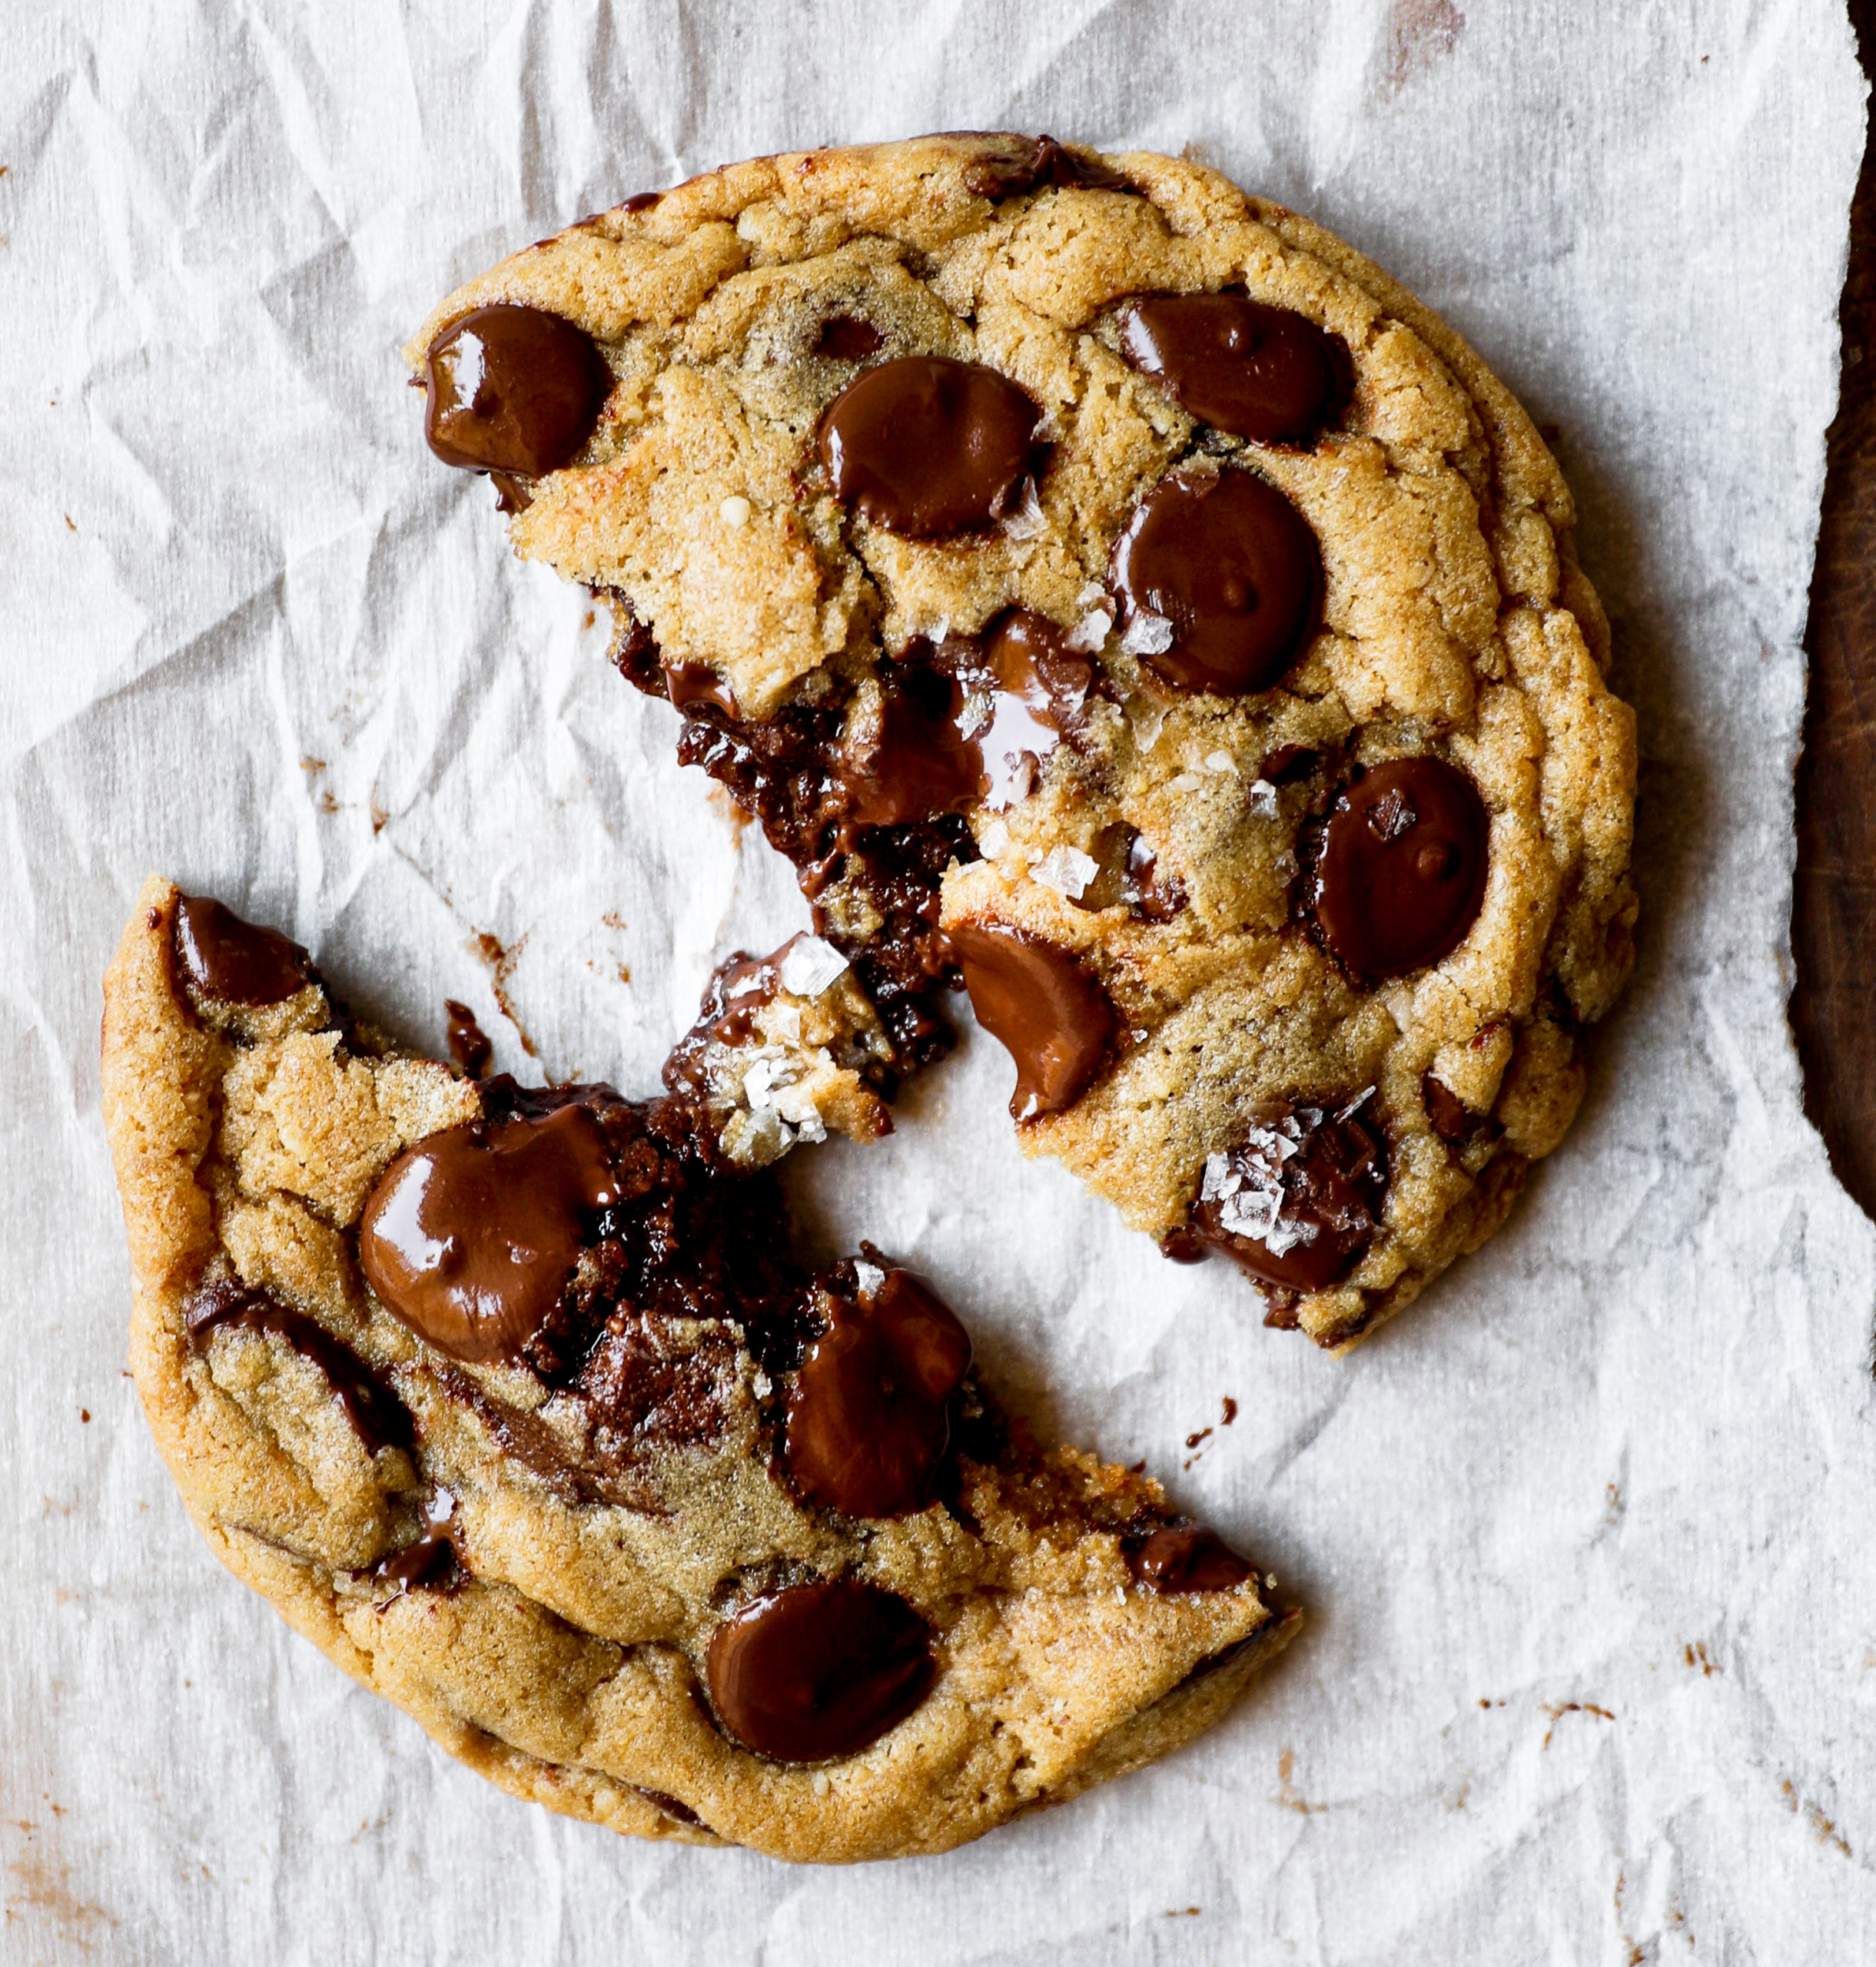 A nutella stuffed chocolate chip cookie.